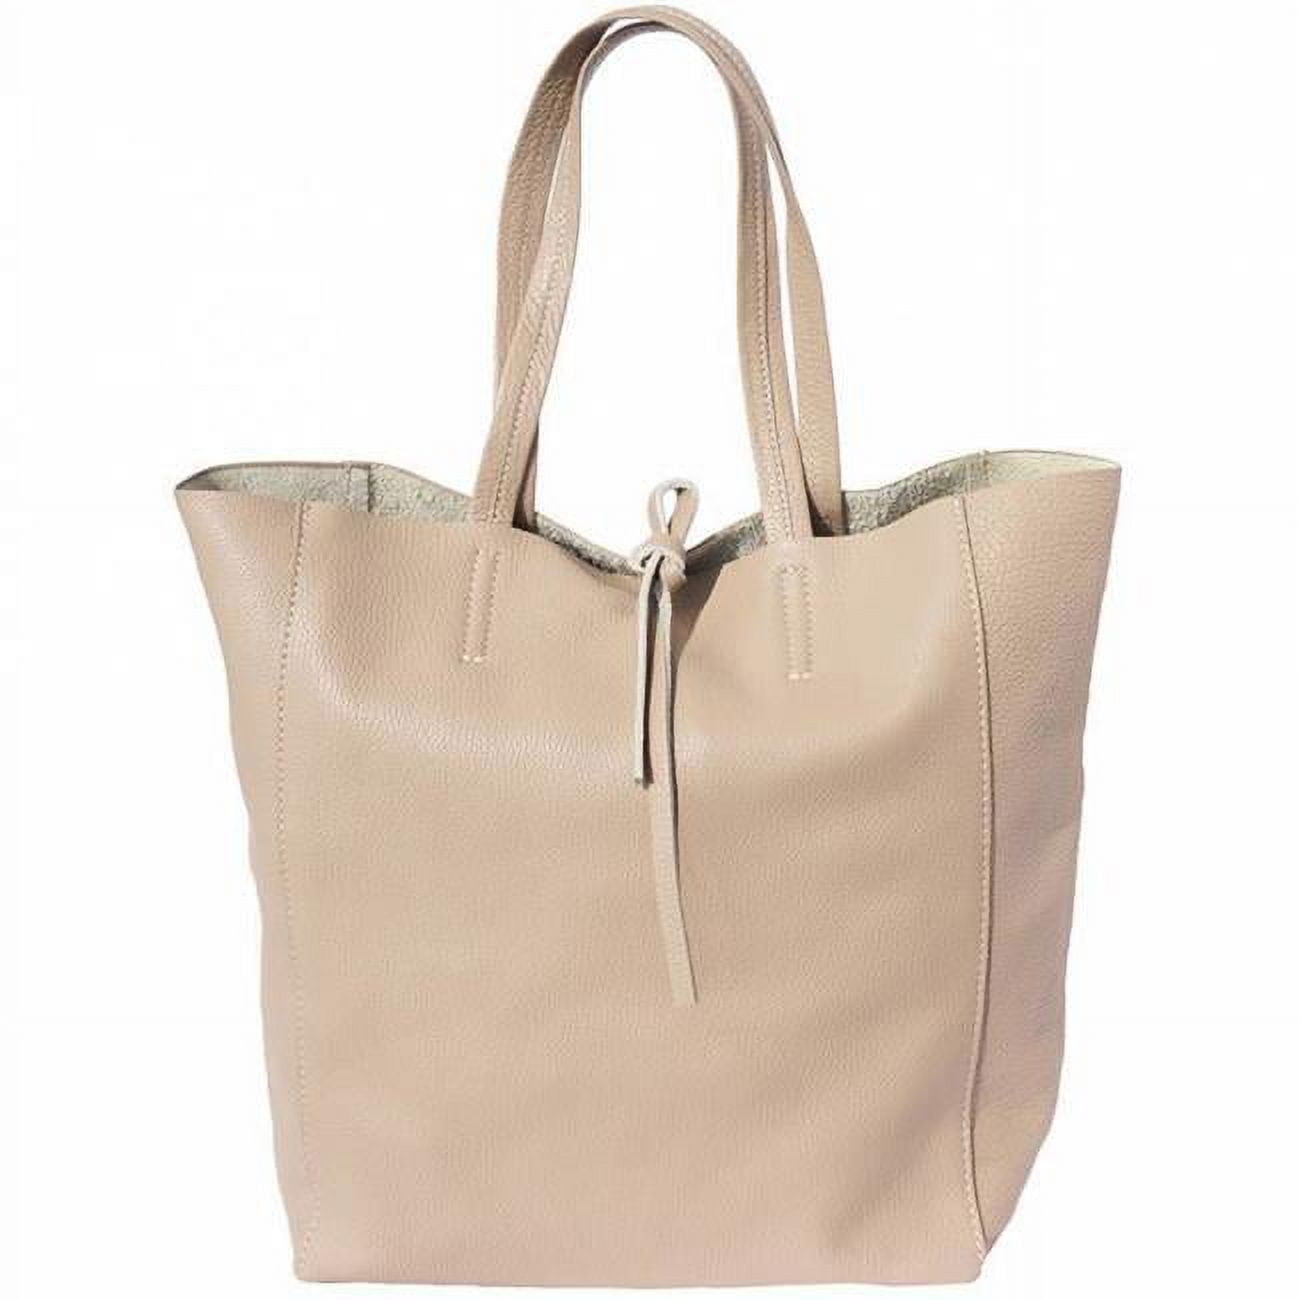 Alive With Style 'Babila' Italian Leather Tote in Orange-Tan-Fuchsia-T –  Alive With Style - Bags With Style